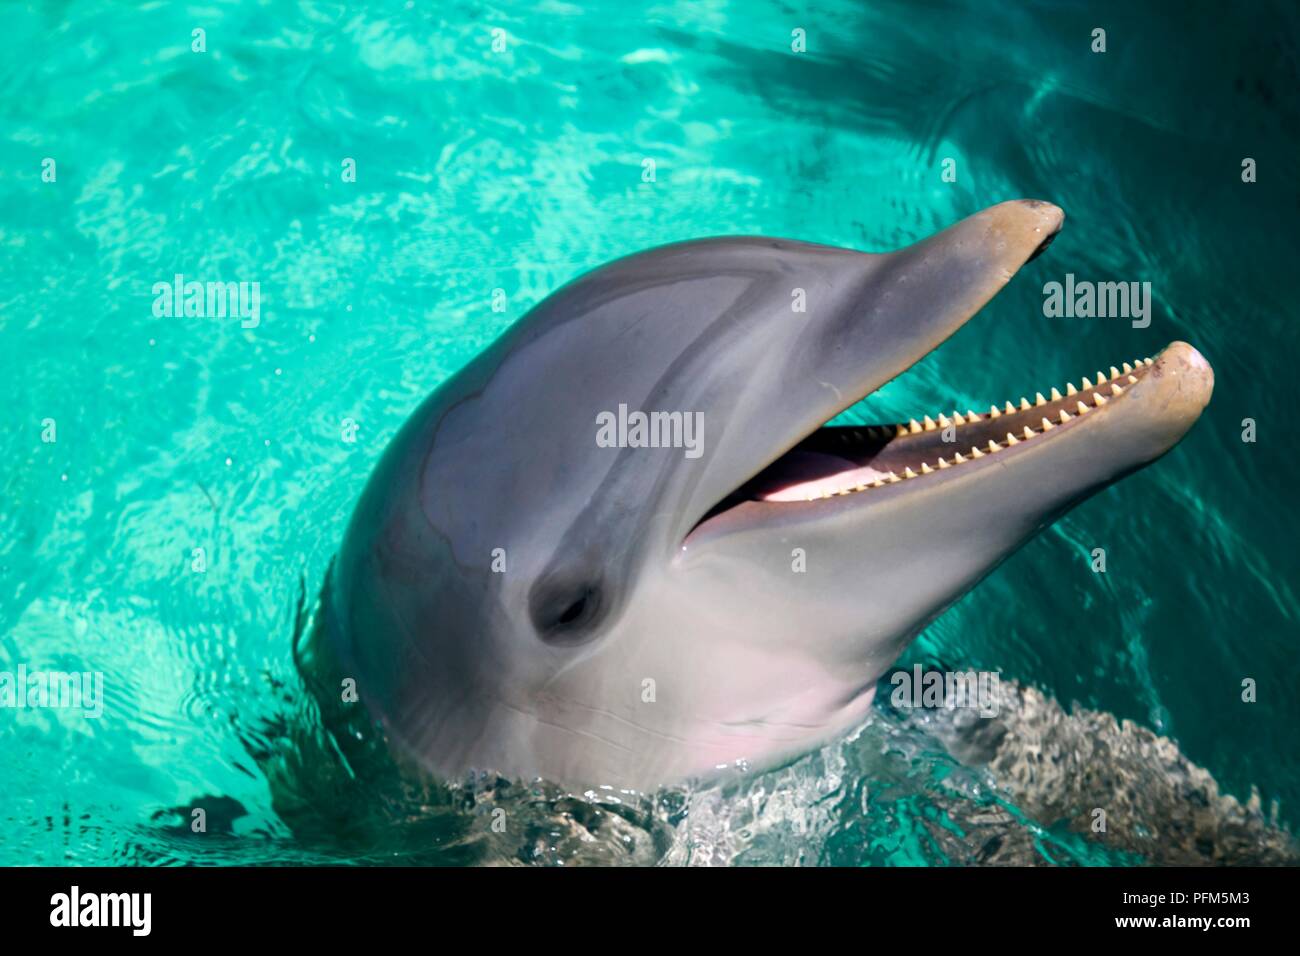 Captive dolphin in pool with head above water and mouth open Stock Photo